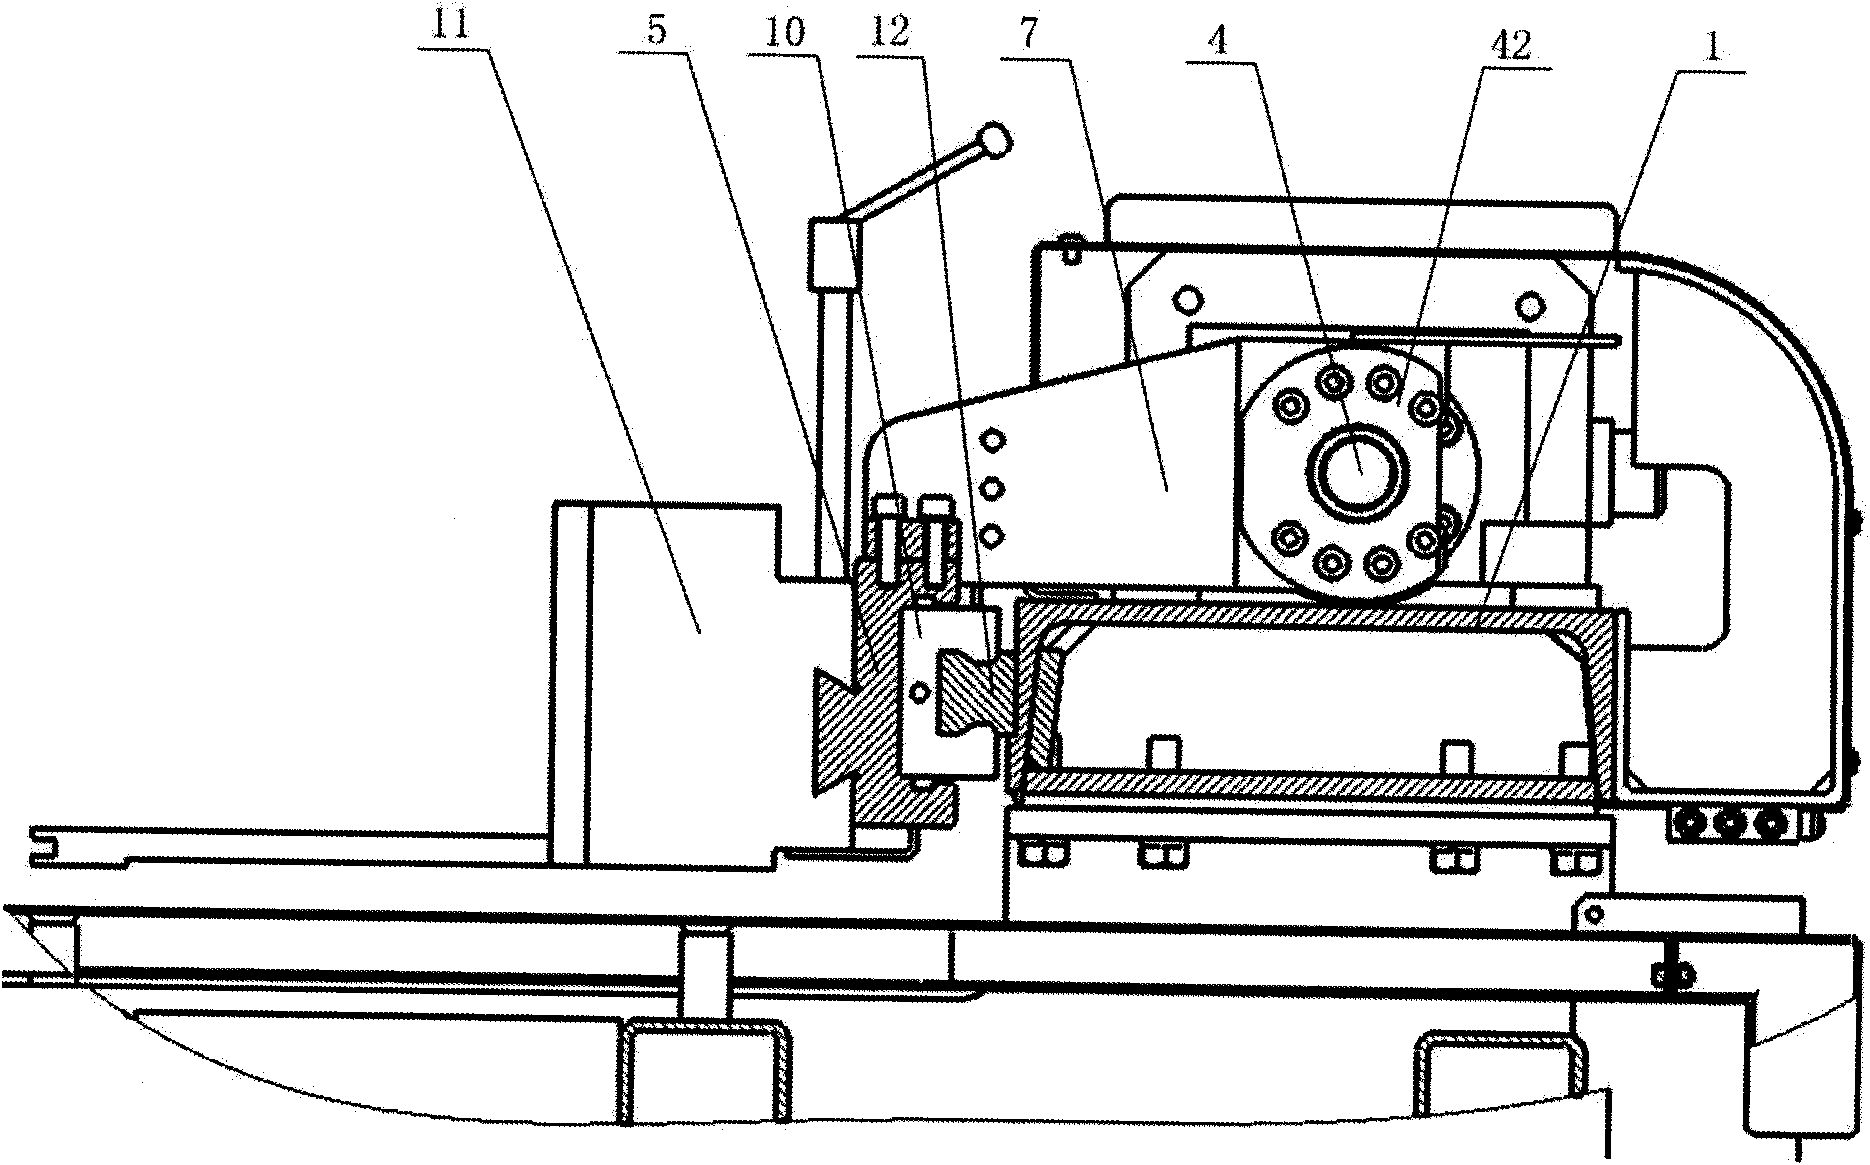 Feeding mechanism of numerical control turret punch press in X-axis direction